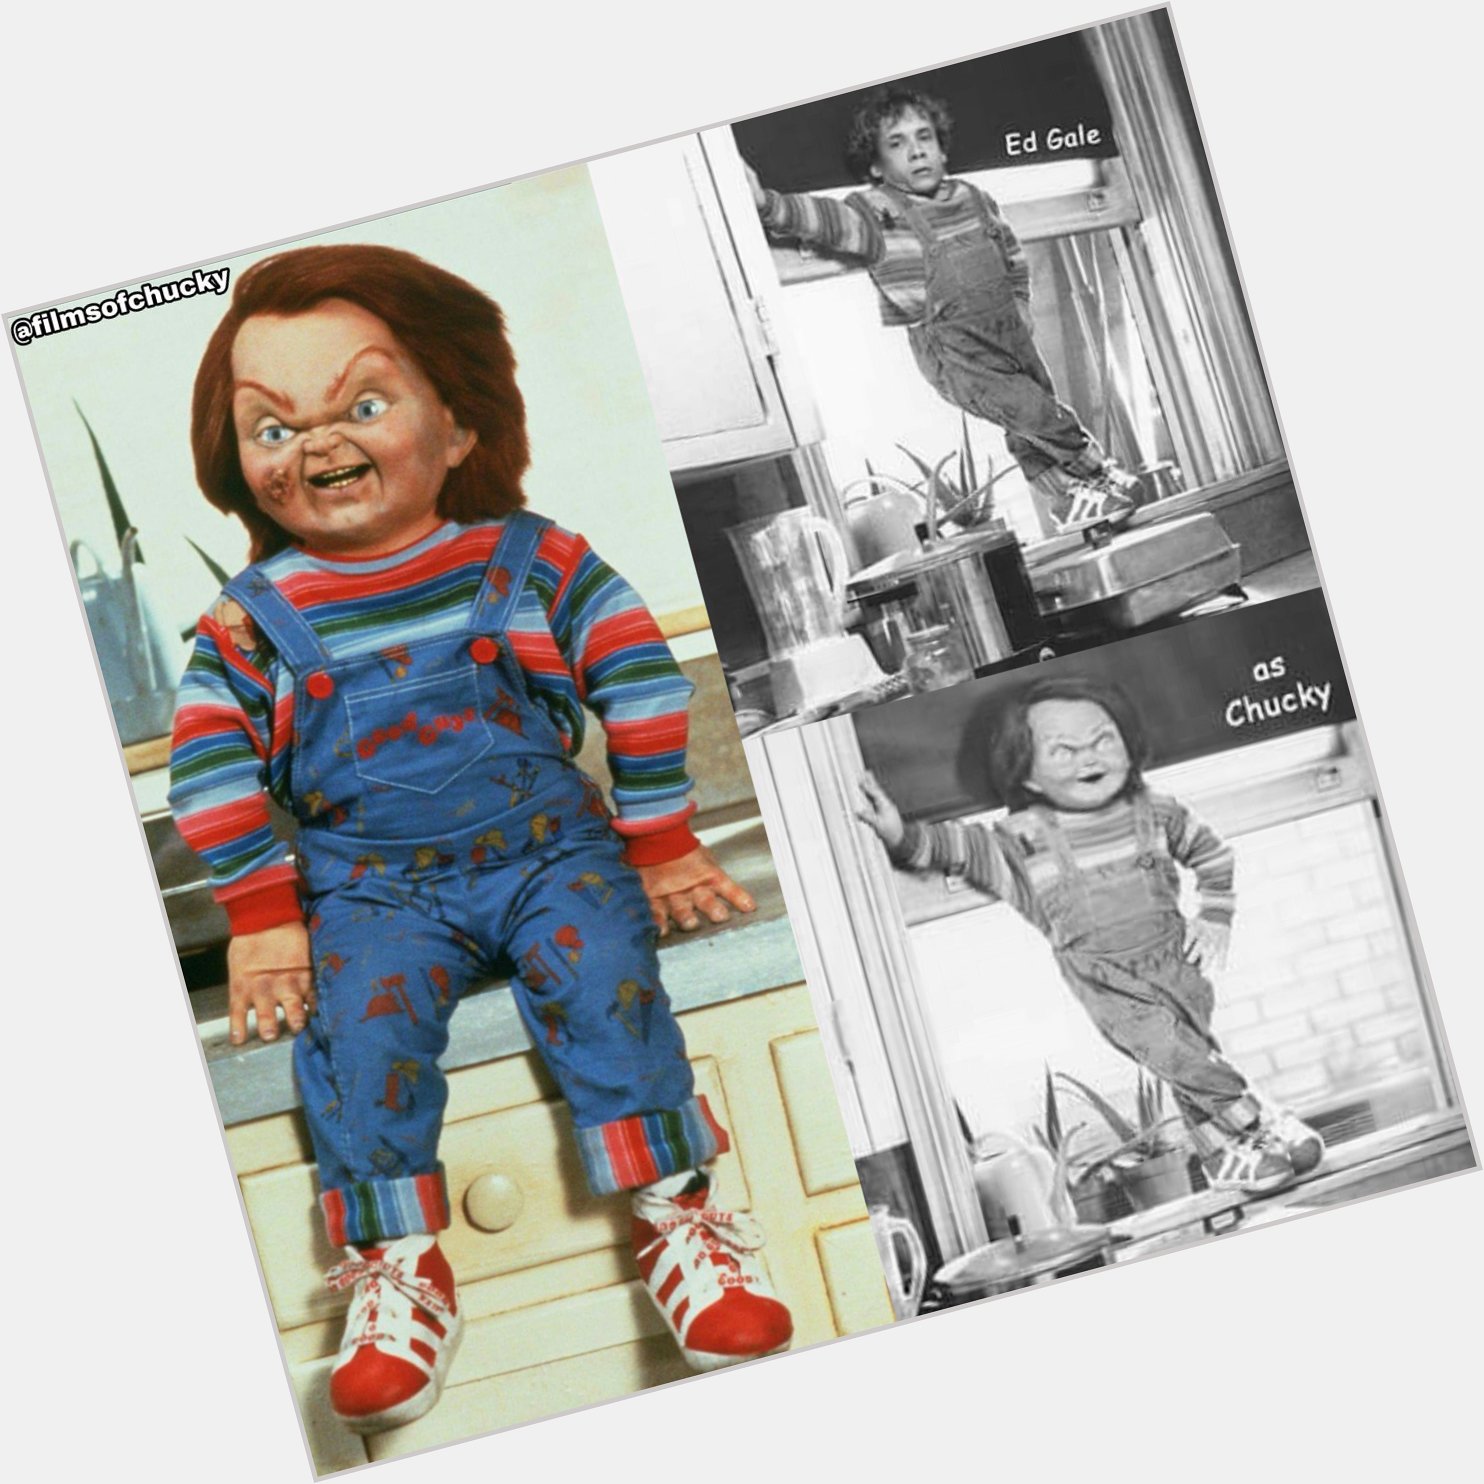 Happy birthday to To make Chucky more life like in Child\s Play they used actor Ed Gale. 